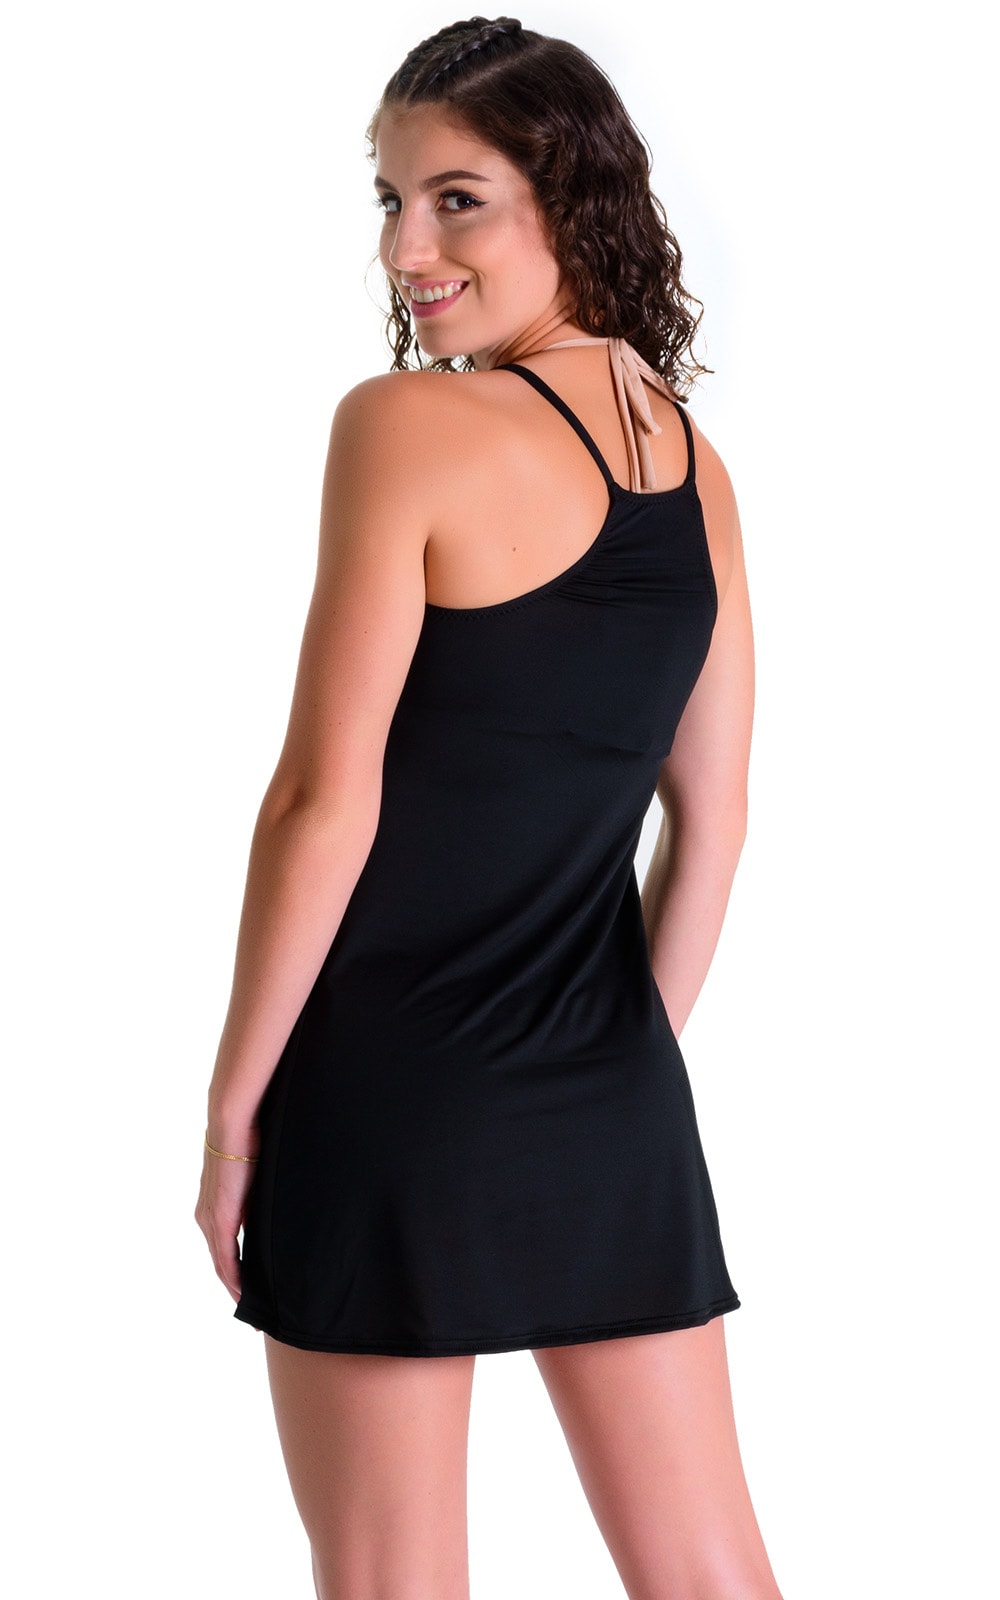 Cover Up Mini Dress in Super ThinSKINZ Black, Rear View